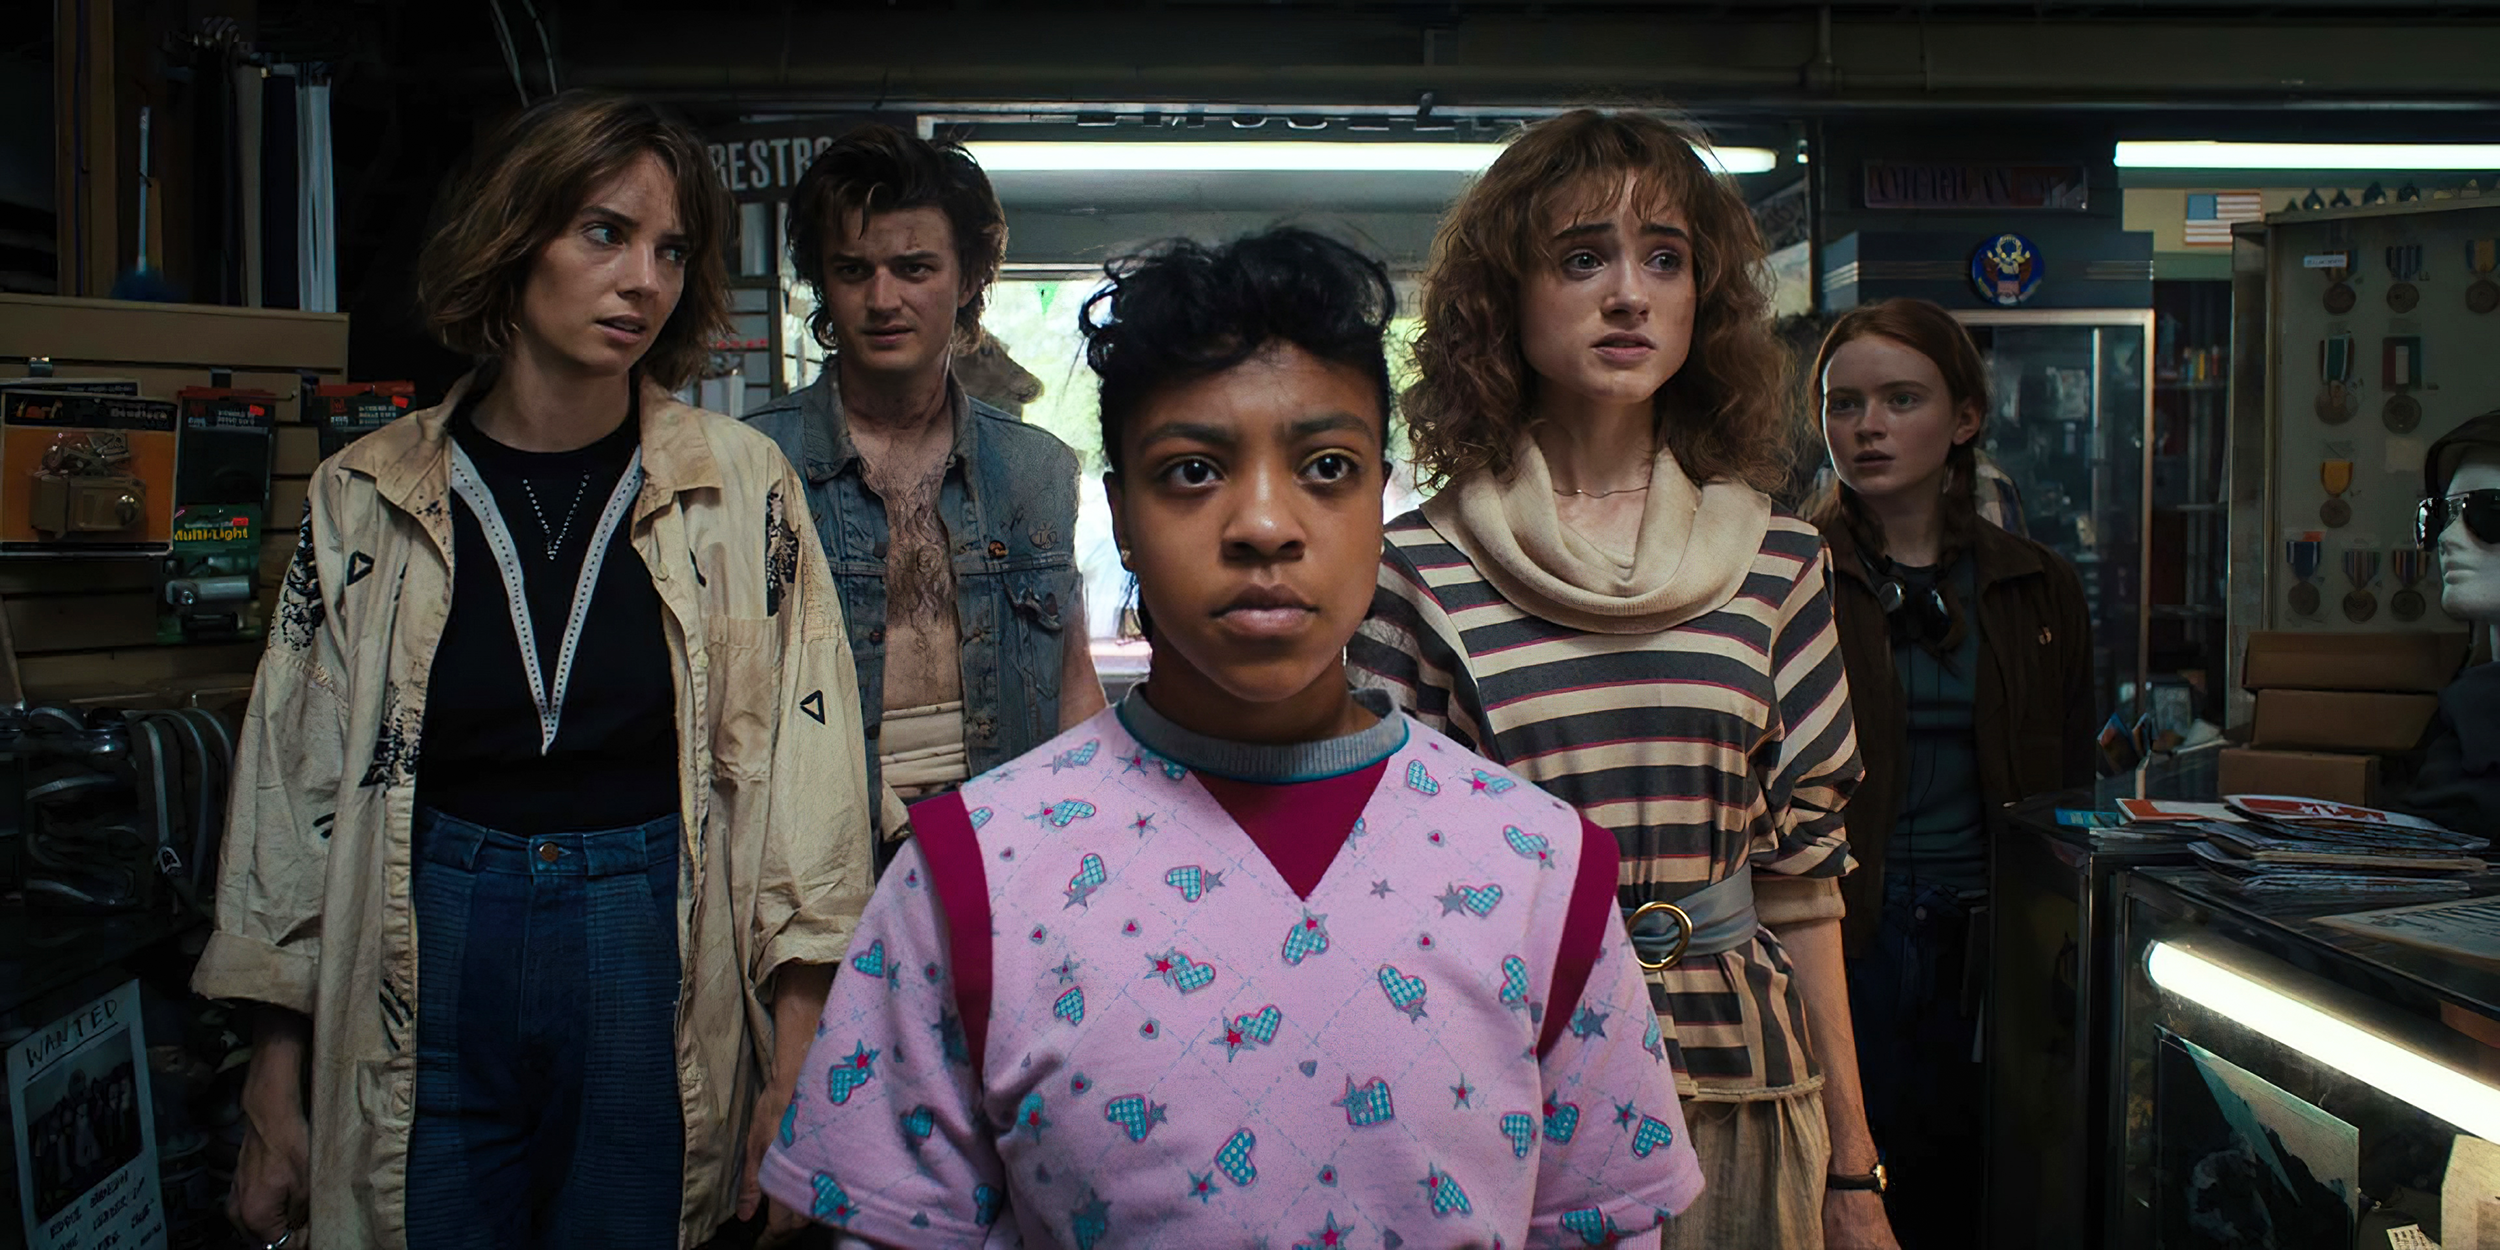 7 Shows Like Stranger Things to Watch After Season 4